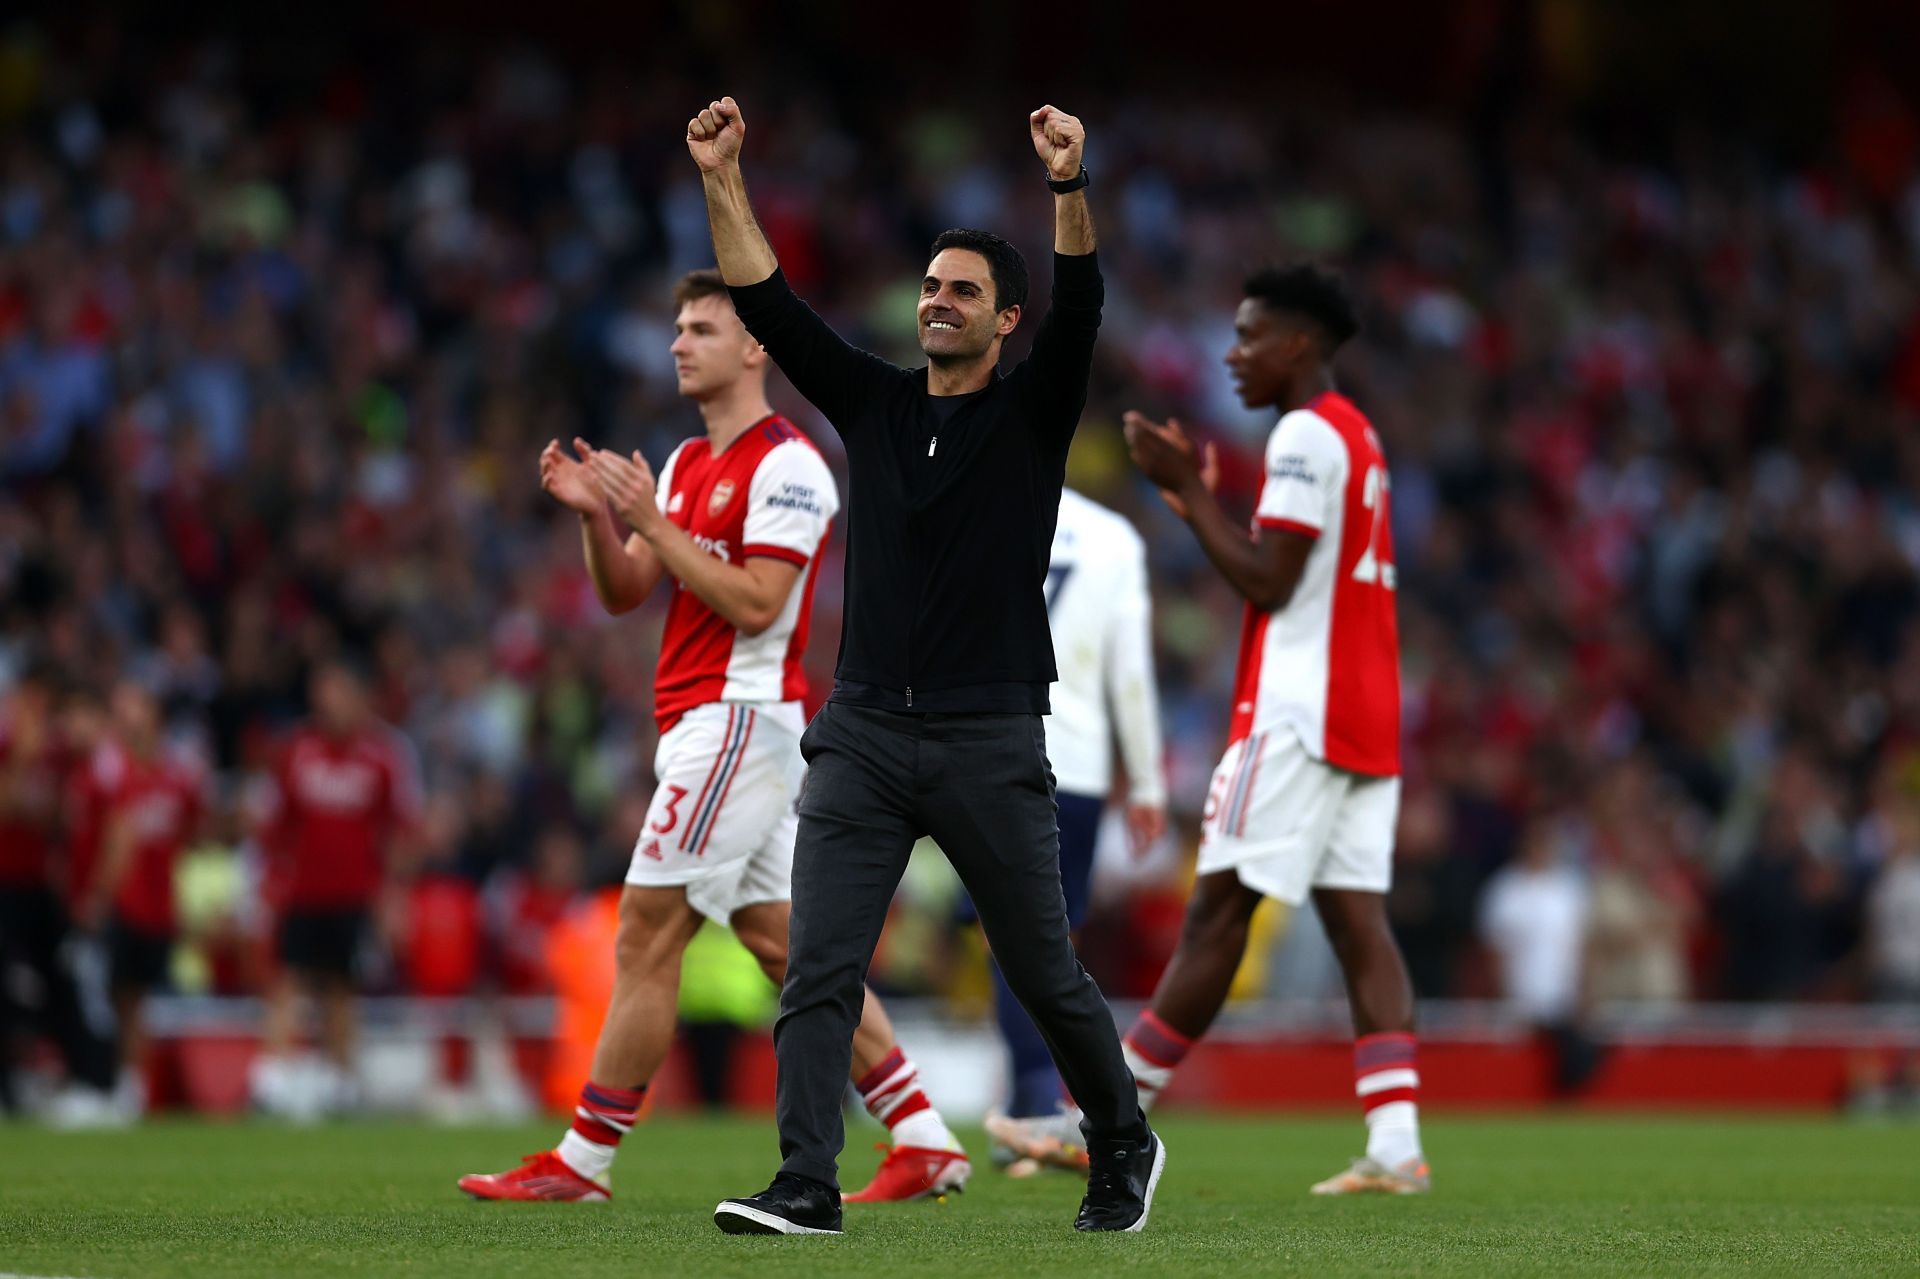 Arsenal manager Mikel Arteta has his team firing on all cylinders.